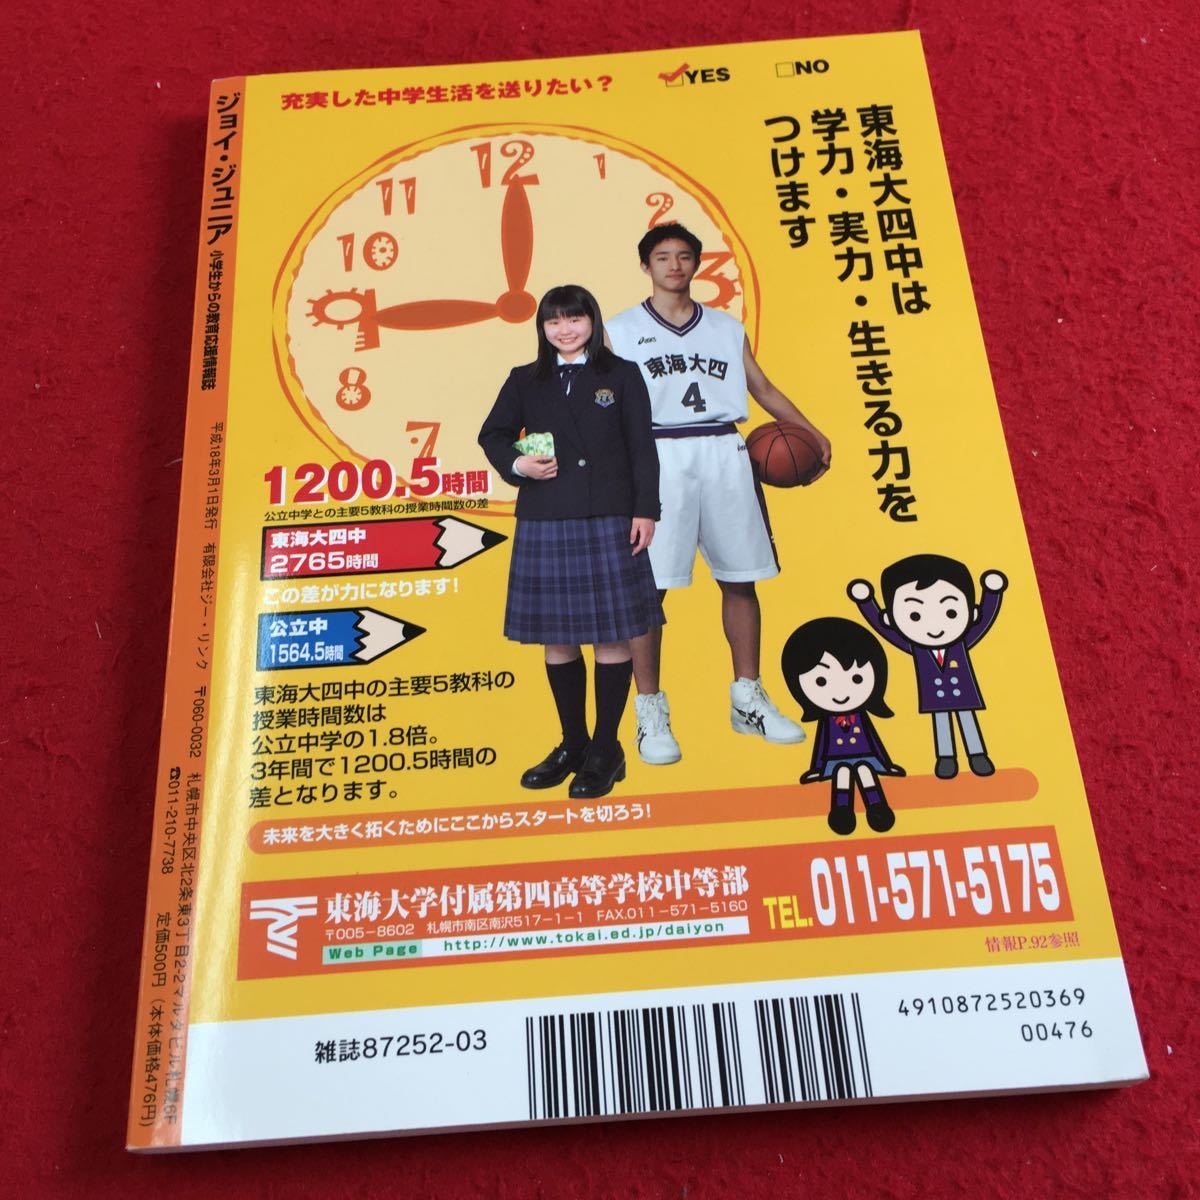 Y32-039 Joy Junior Hokkaido version VOL.3 2006 year issue elementary school student from education respondent . information magazine .*..... ... long time period. meal. large cut .ji-* link 